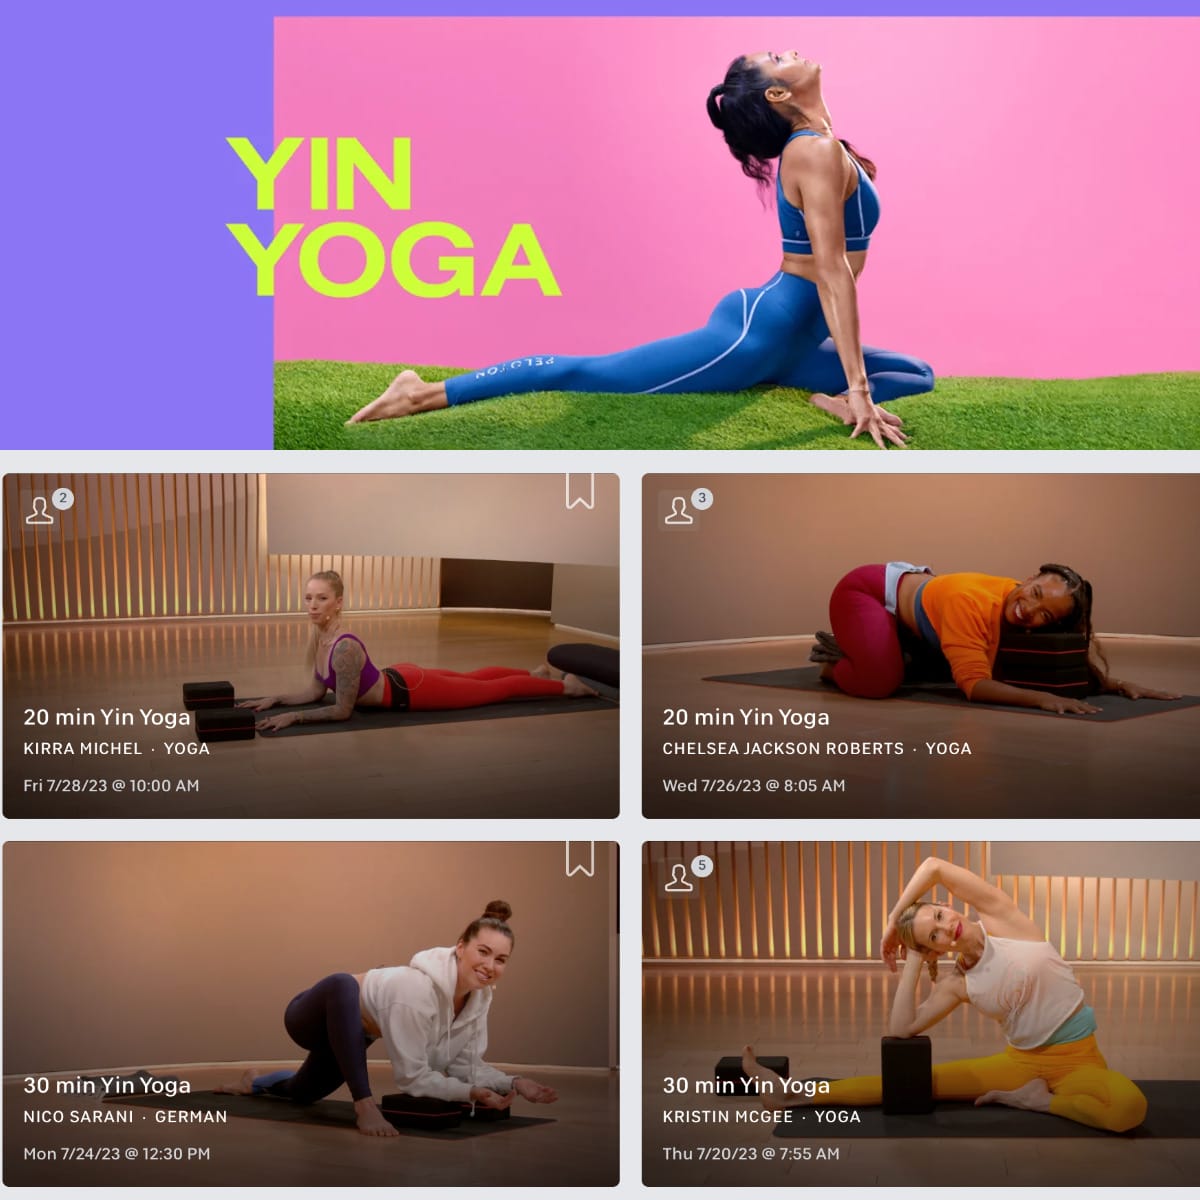 Yin Yoga vs. Hatha Yoga, Differences & Similarities. All You Need To Know